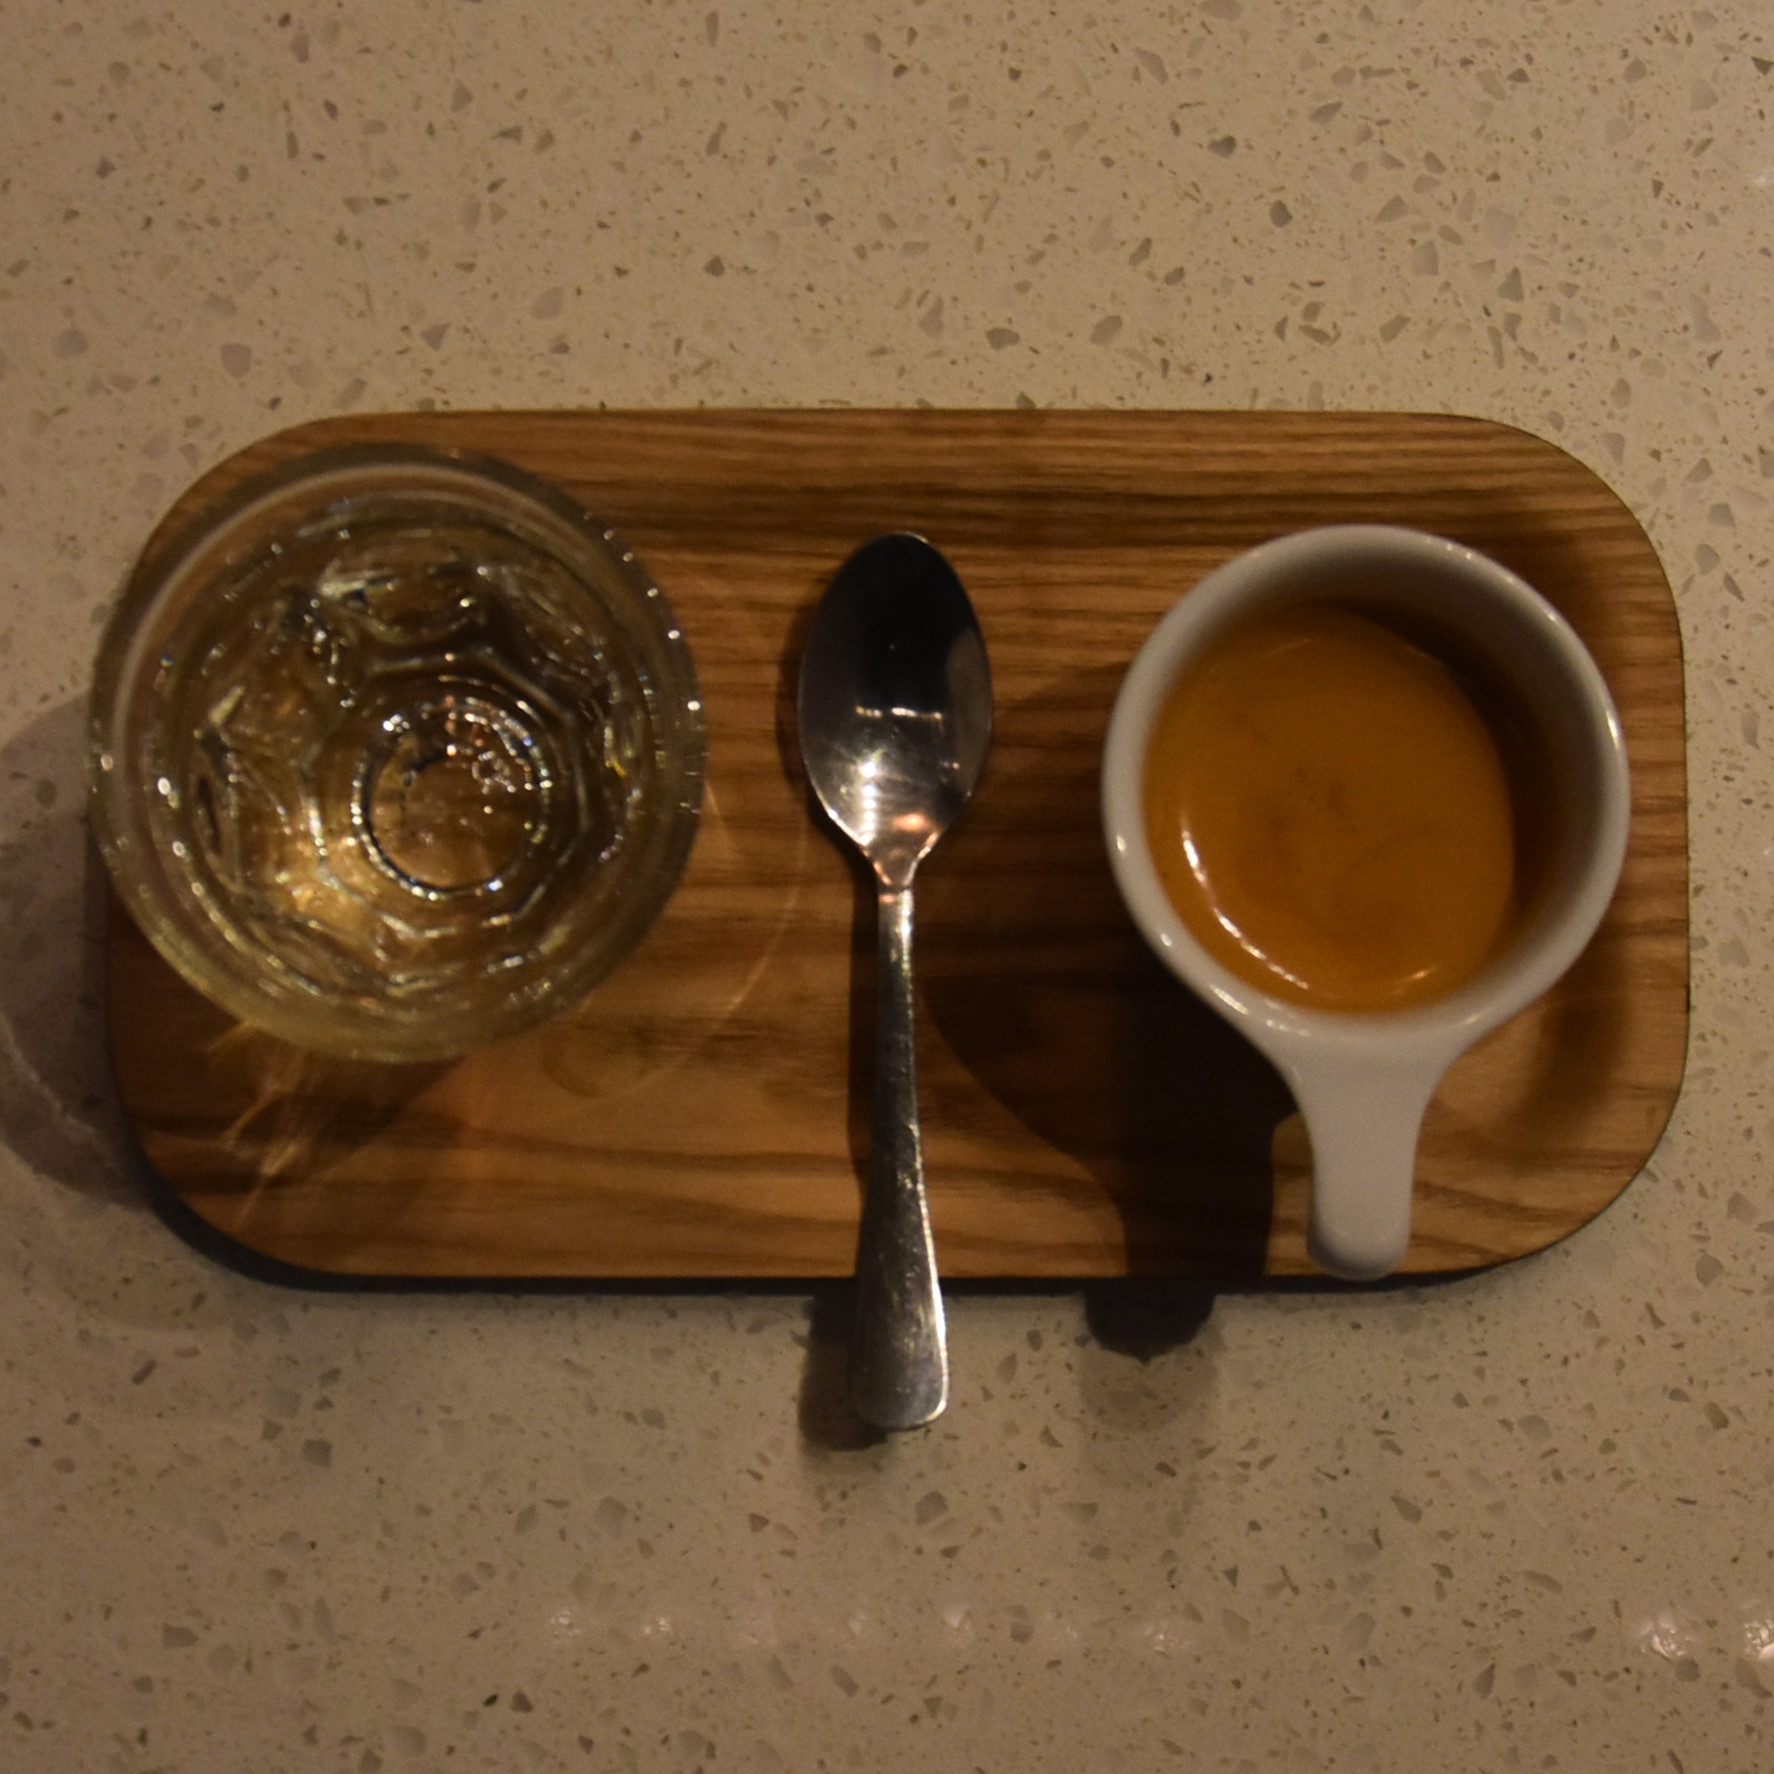 My espresso, made with the 120PSI house-blend at Presta Coffee, Mercado San Augustin, and beautifully presented on a wooden tray with a glass of sparkling water.